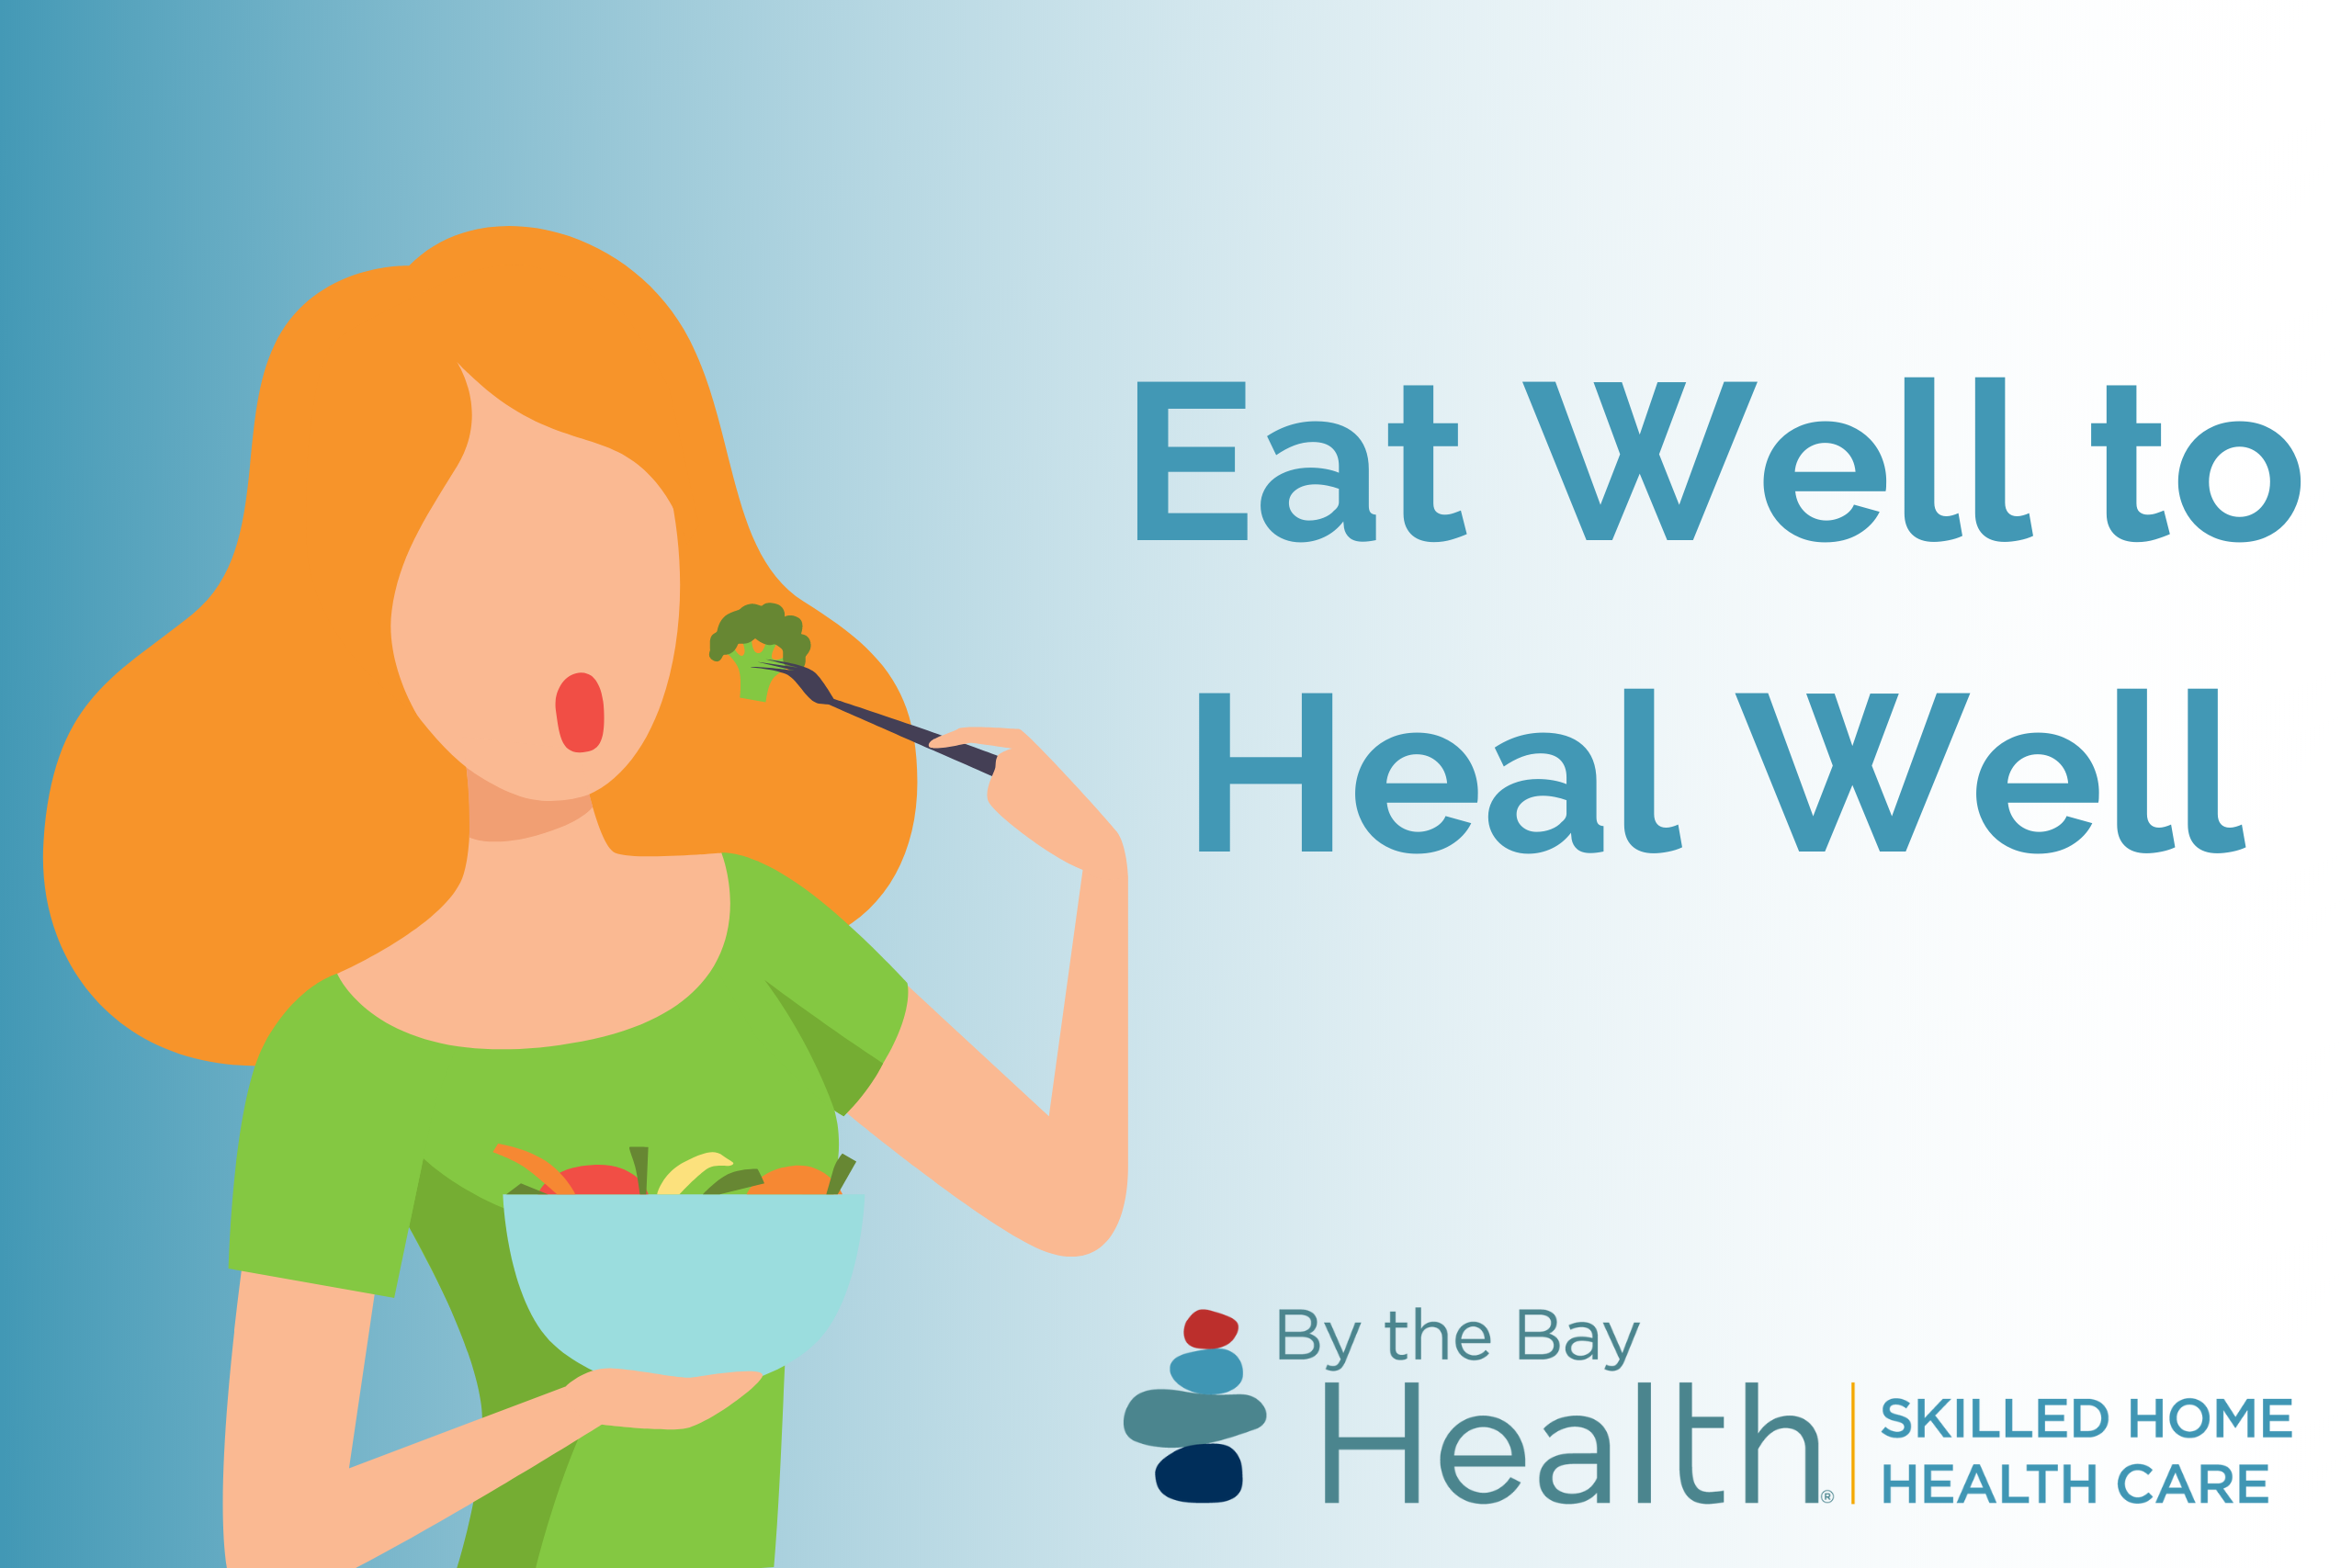 Eat Well to Heal Well